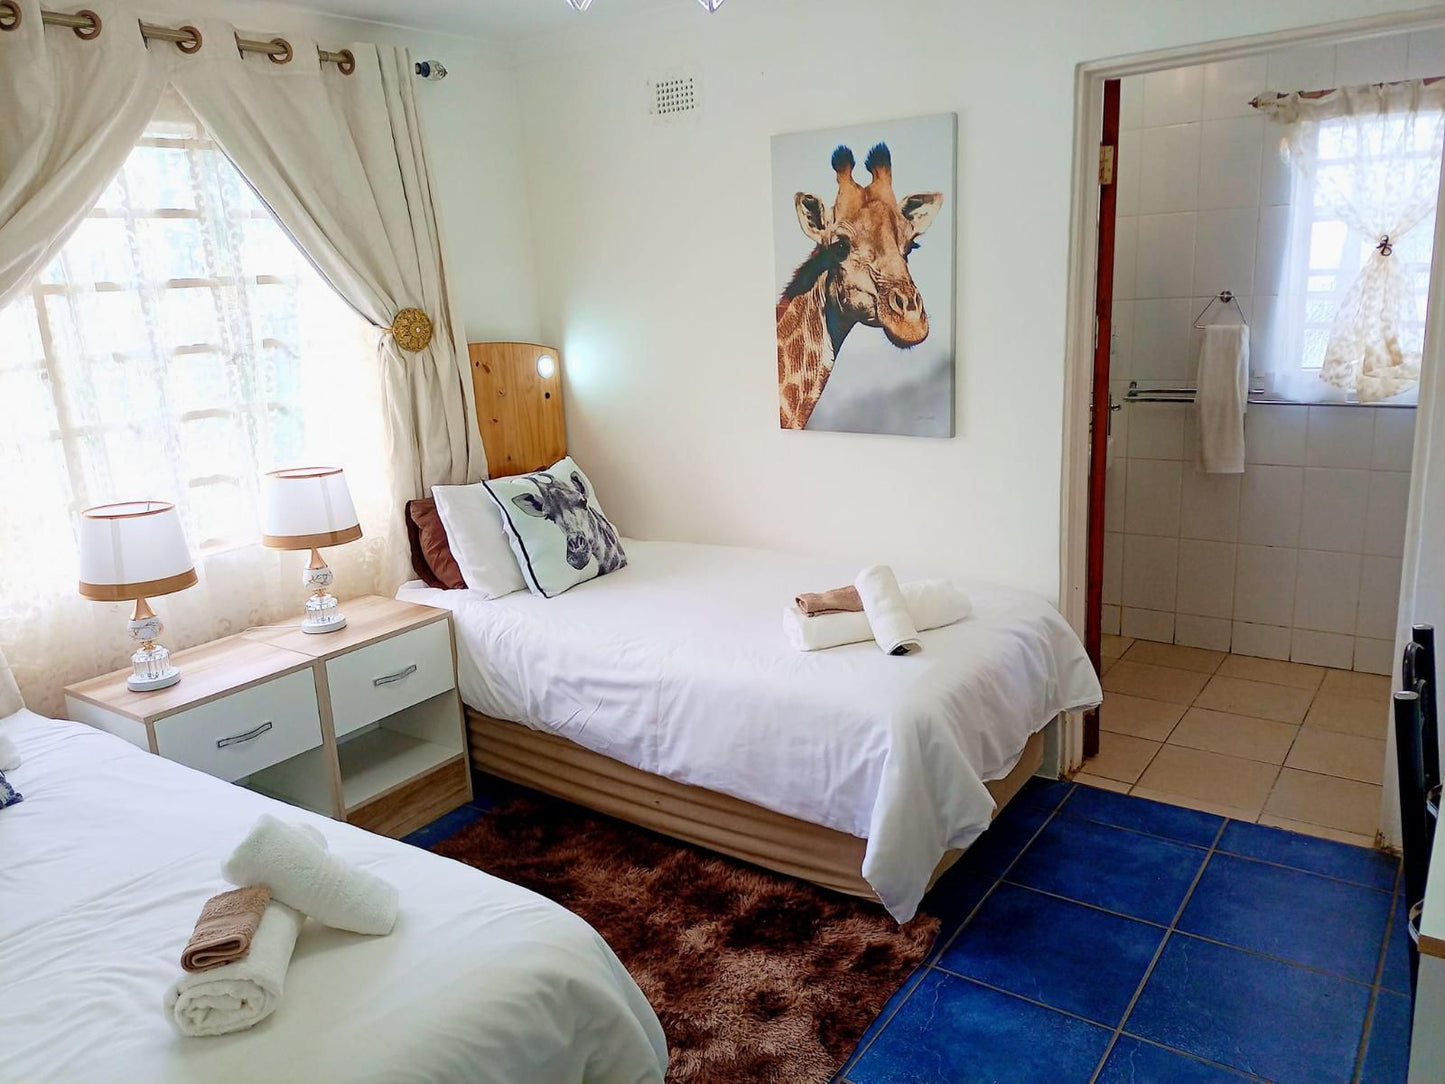 Queensburgh Bed And Breakfast Or Self Catering Queensburgh Durban Kwazulu Natal South Africa 